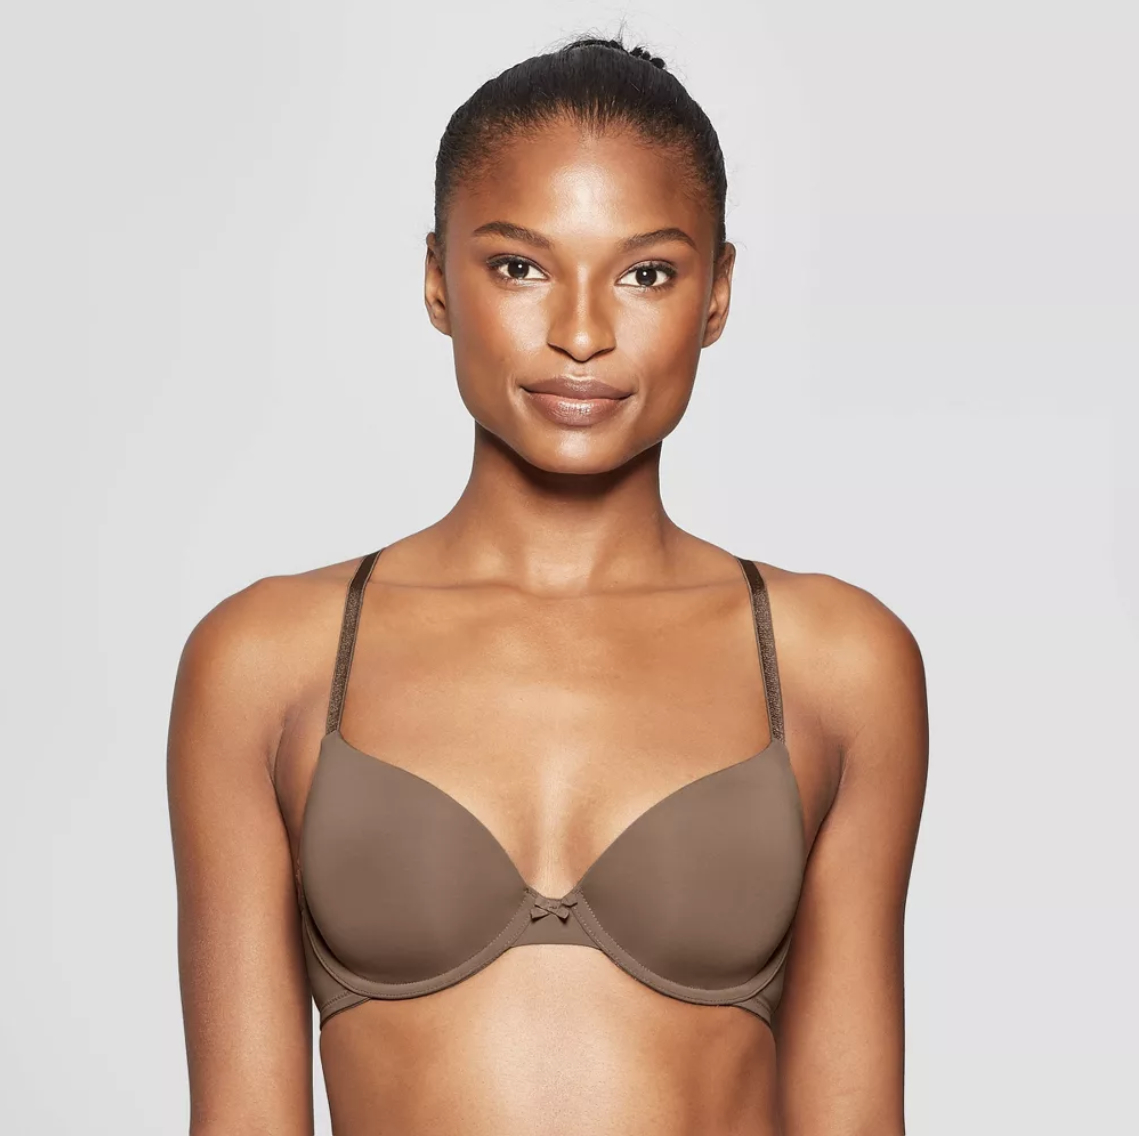 If You're In Need Of A New Bra, Here Are 20 Truly Excellent Options From Target